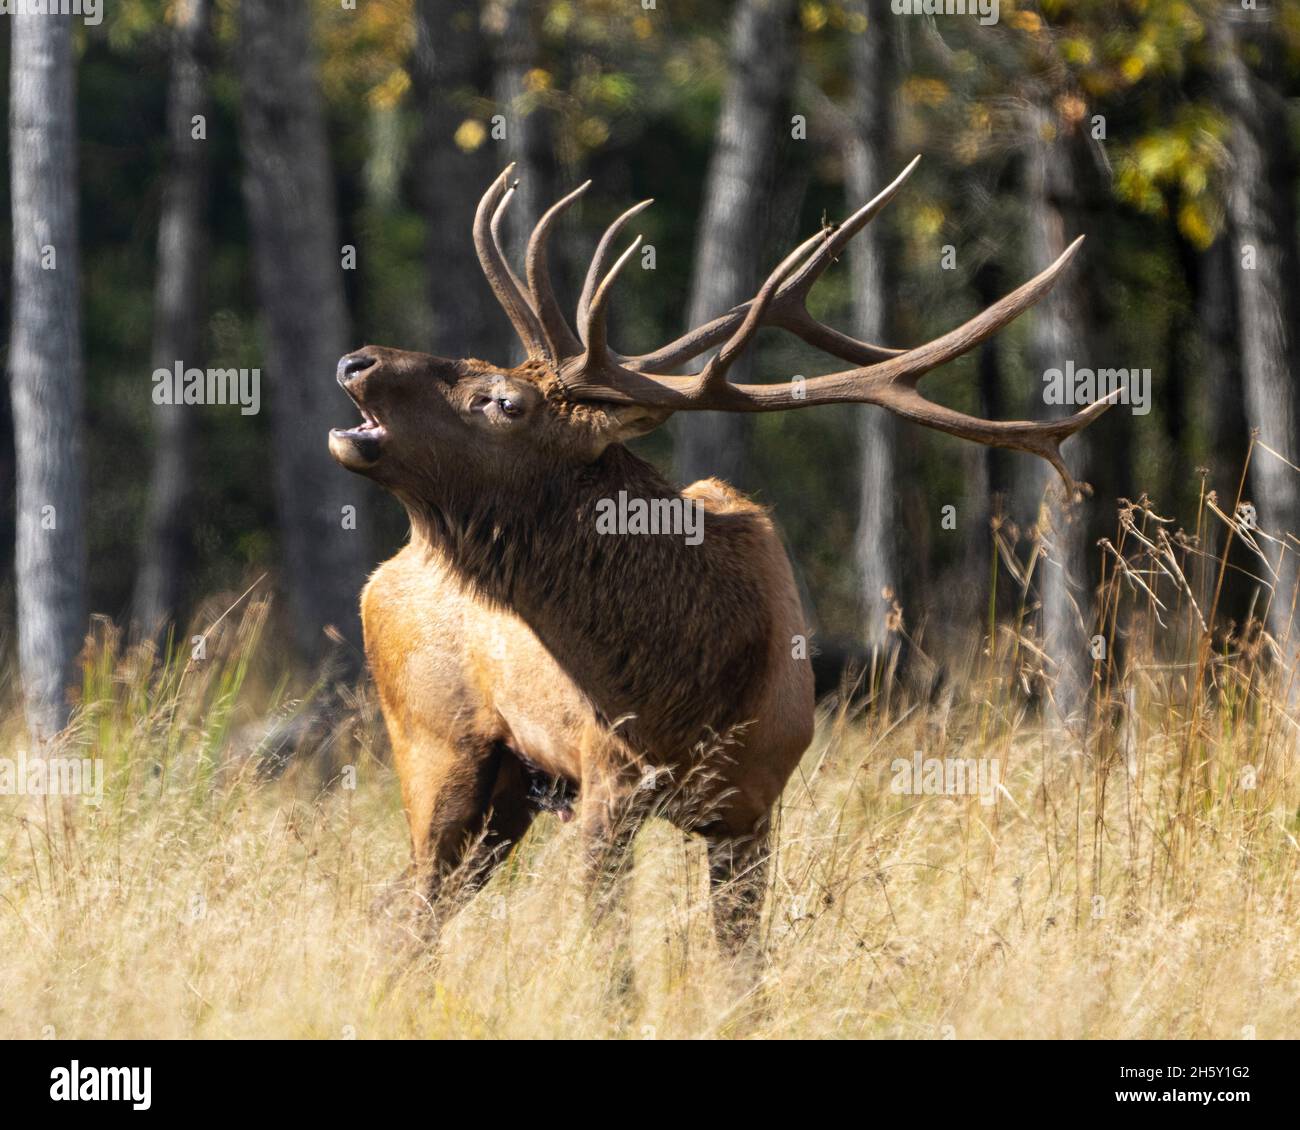 Elk male animal in the forest in the mating hunting season and making a bulge call, displaying mouth open, antlers in its environment and habitat. Stock Photo